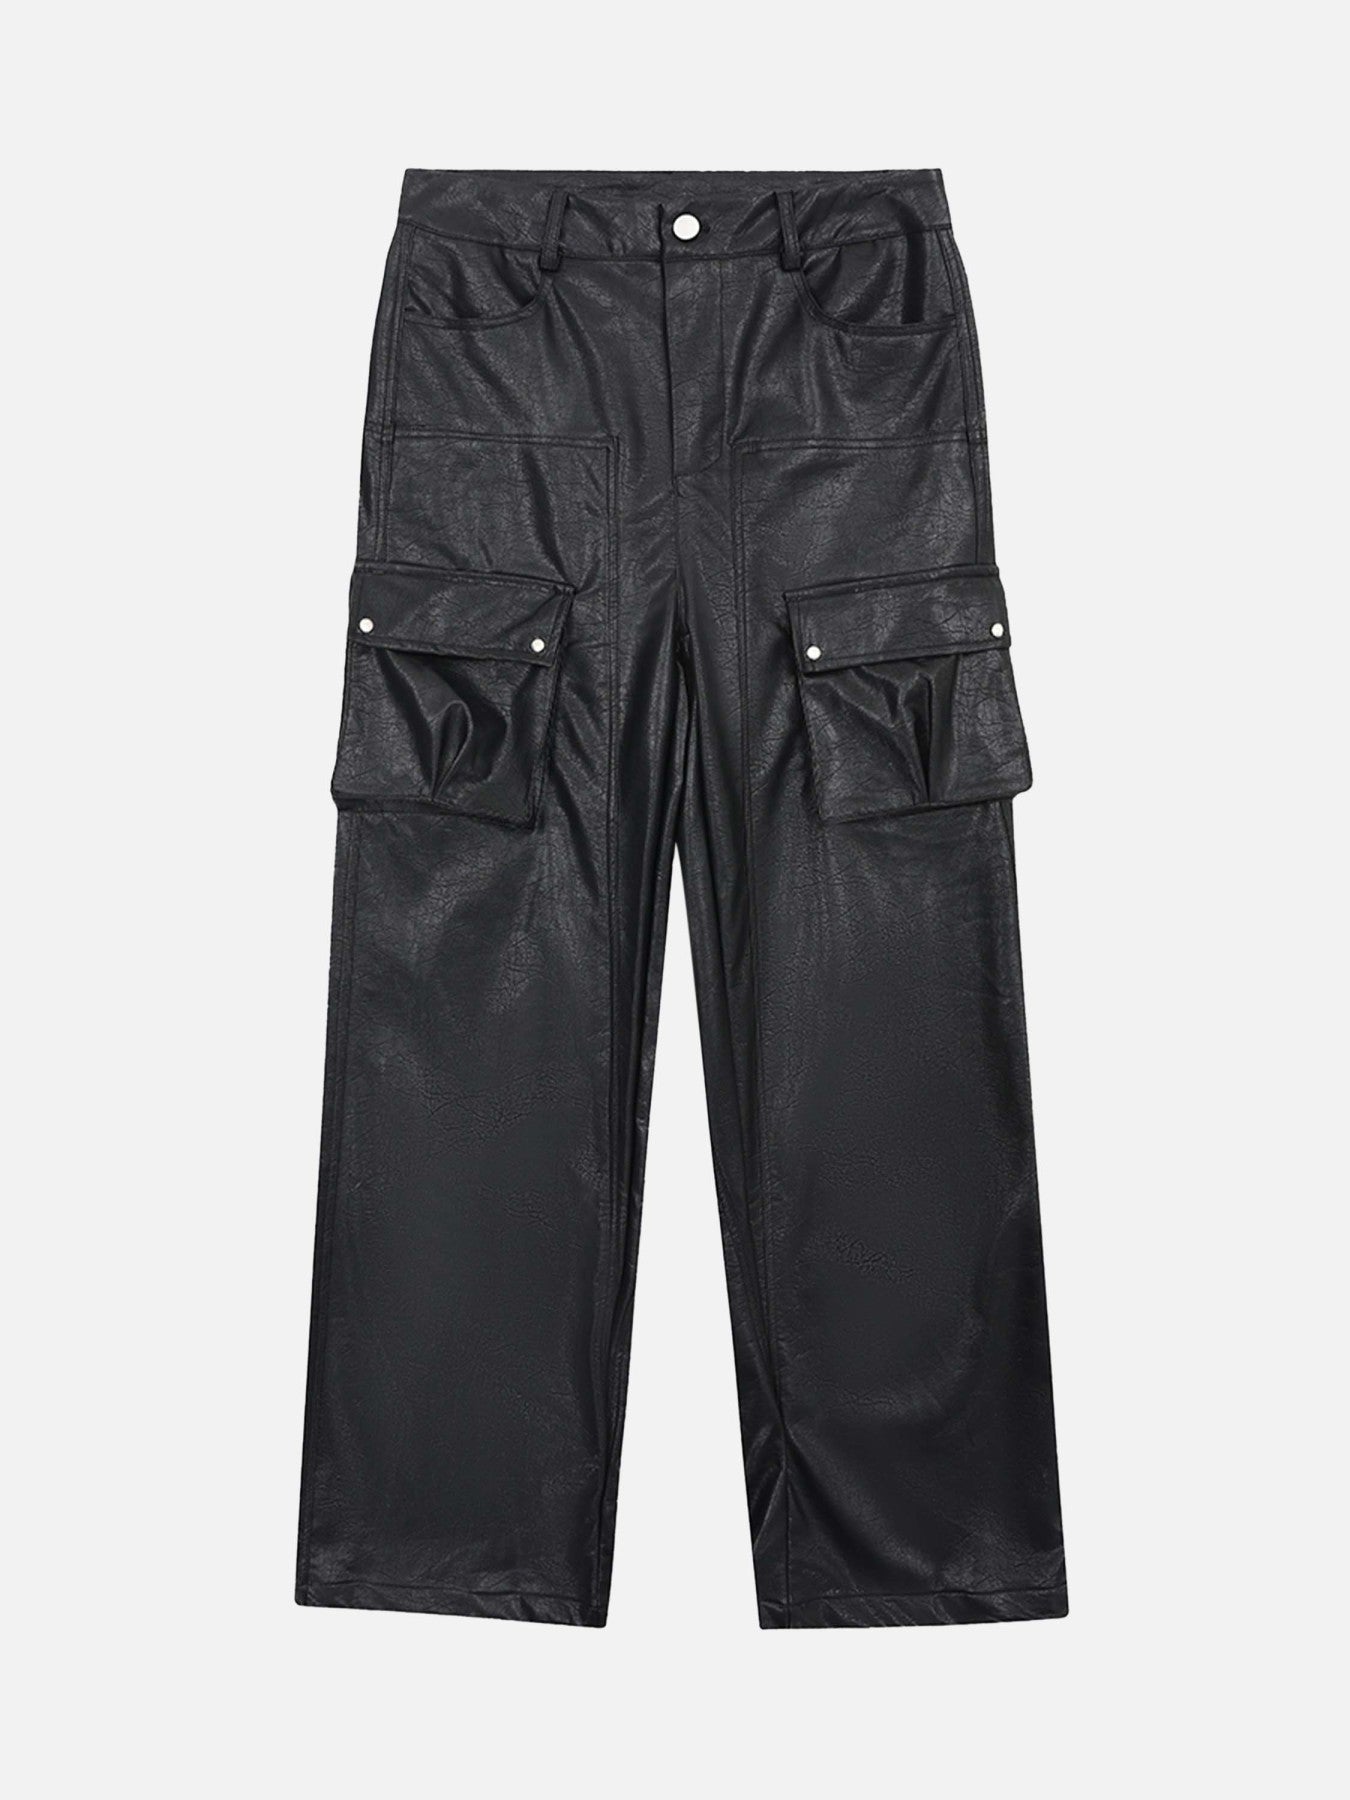 Thesupermade American PU Leather Cargo Pants